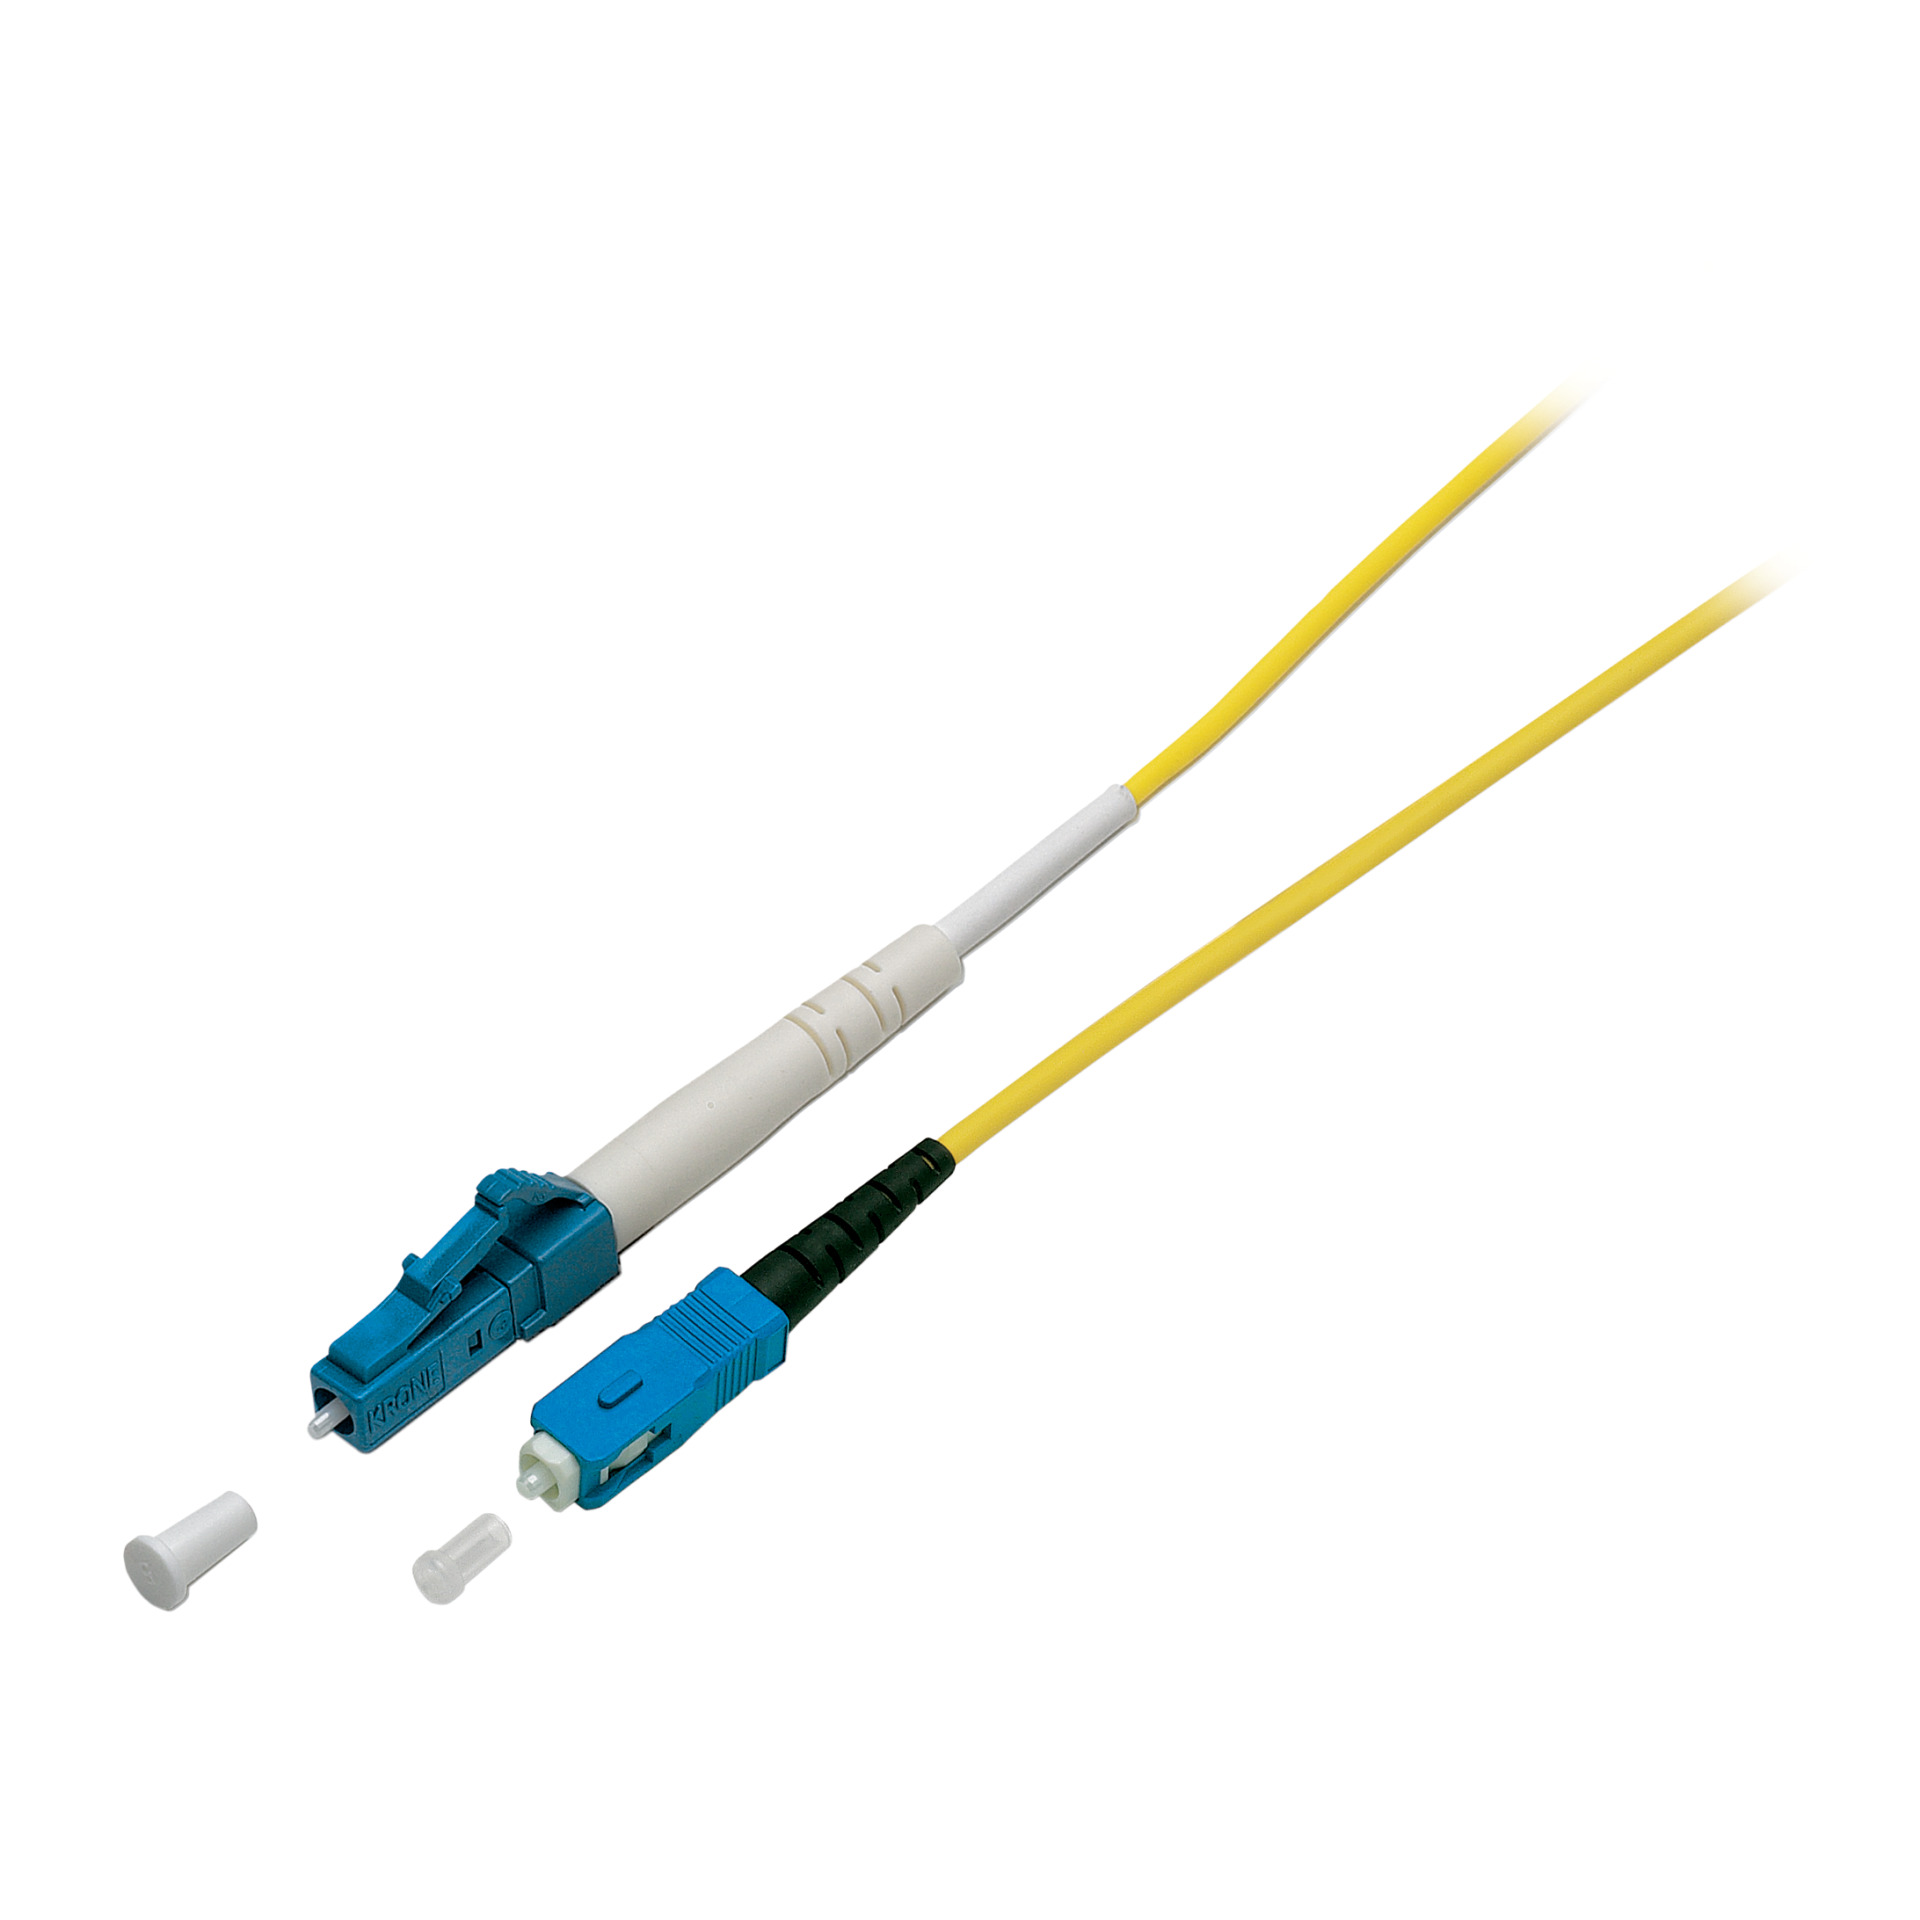 Simplex FO Patch Cable LC-SC G657.A2 3m 2,0mm yellow 9/125µm